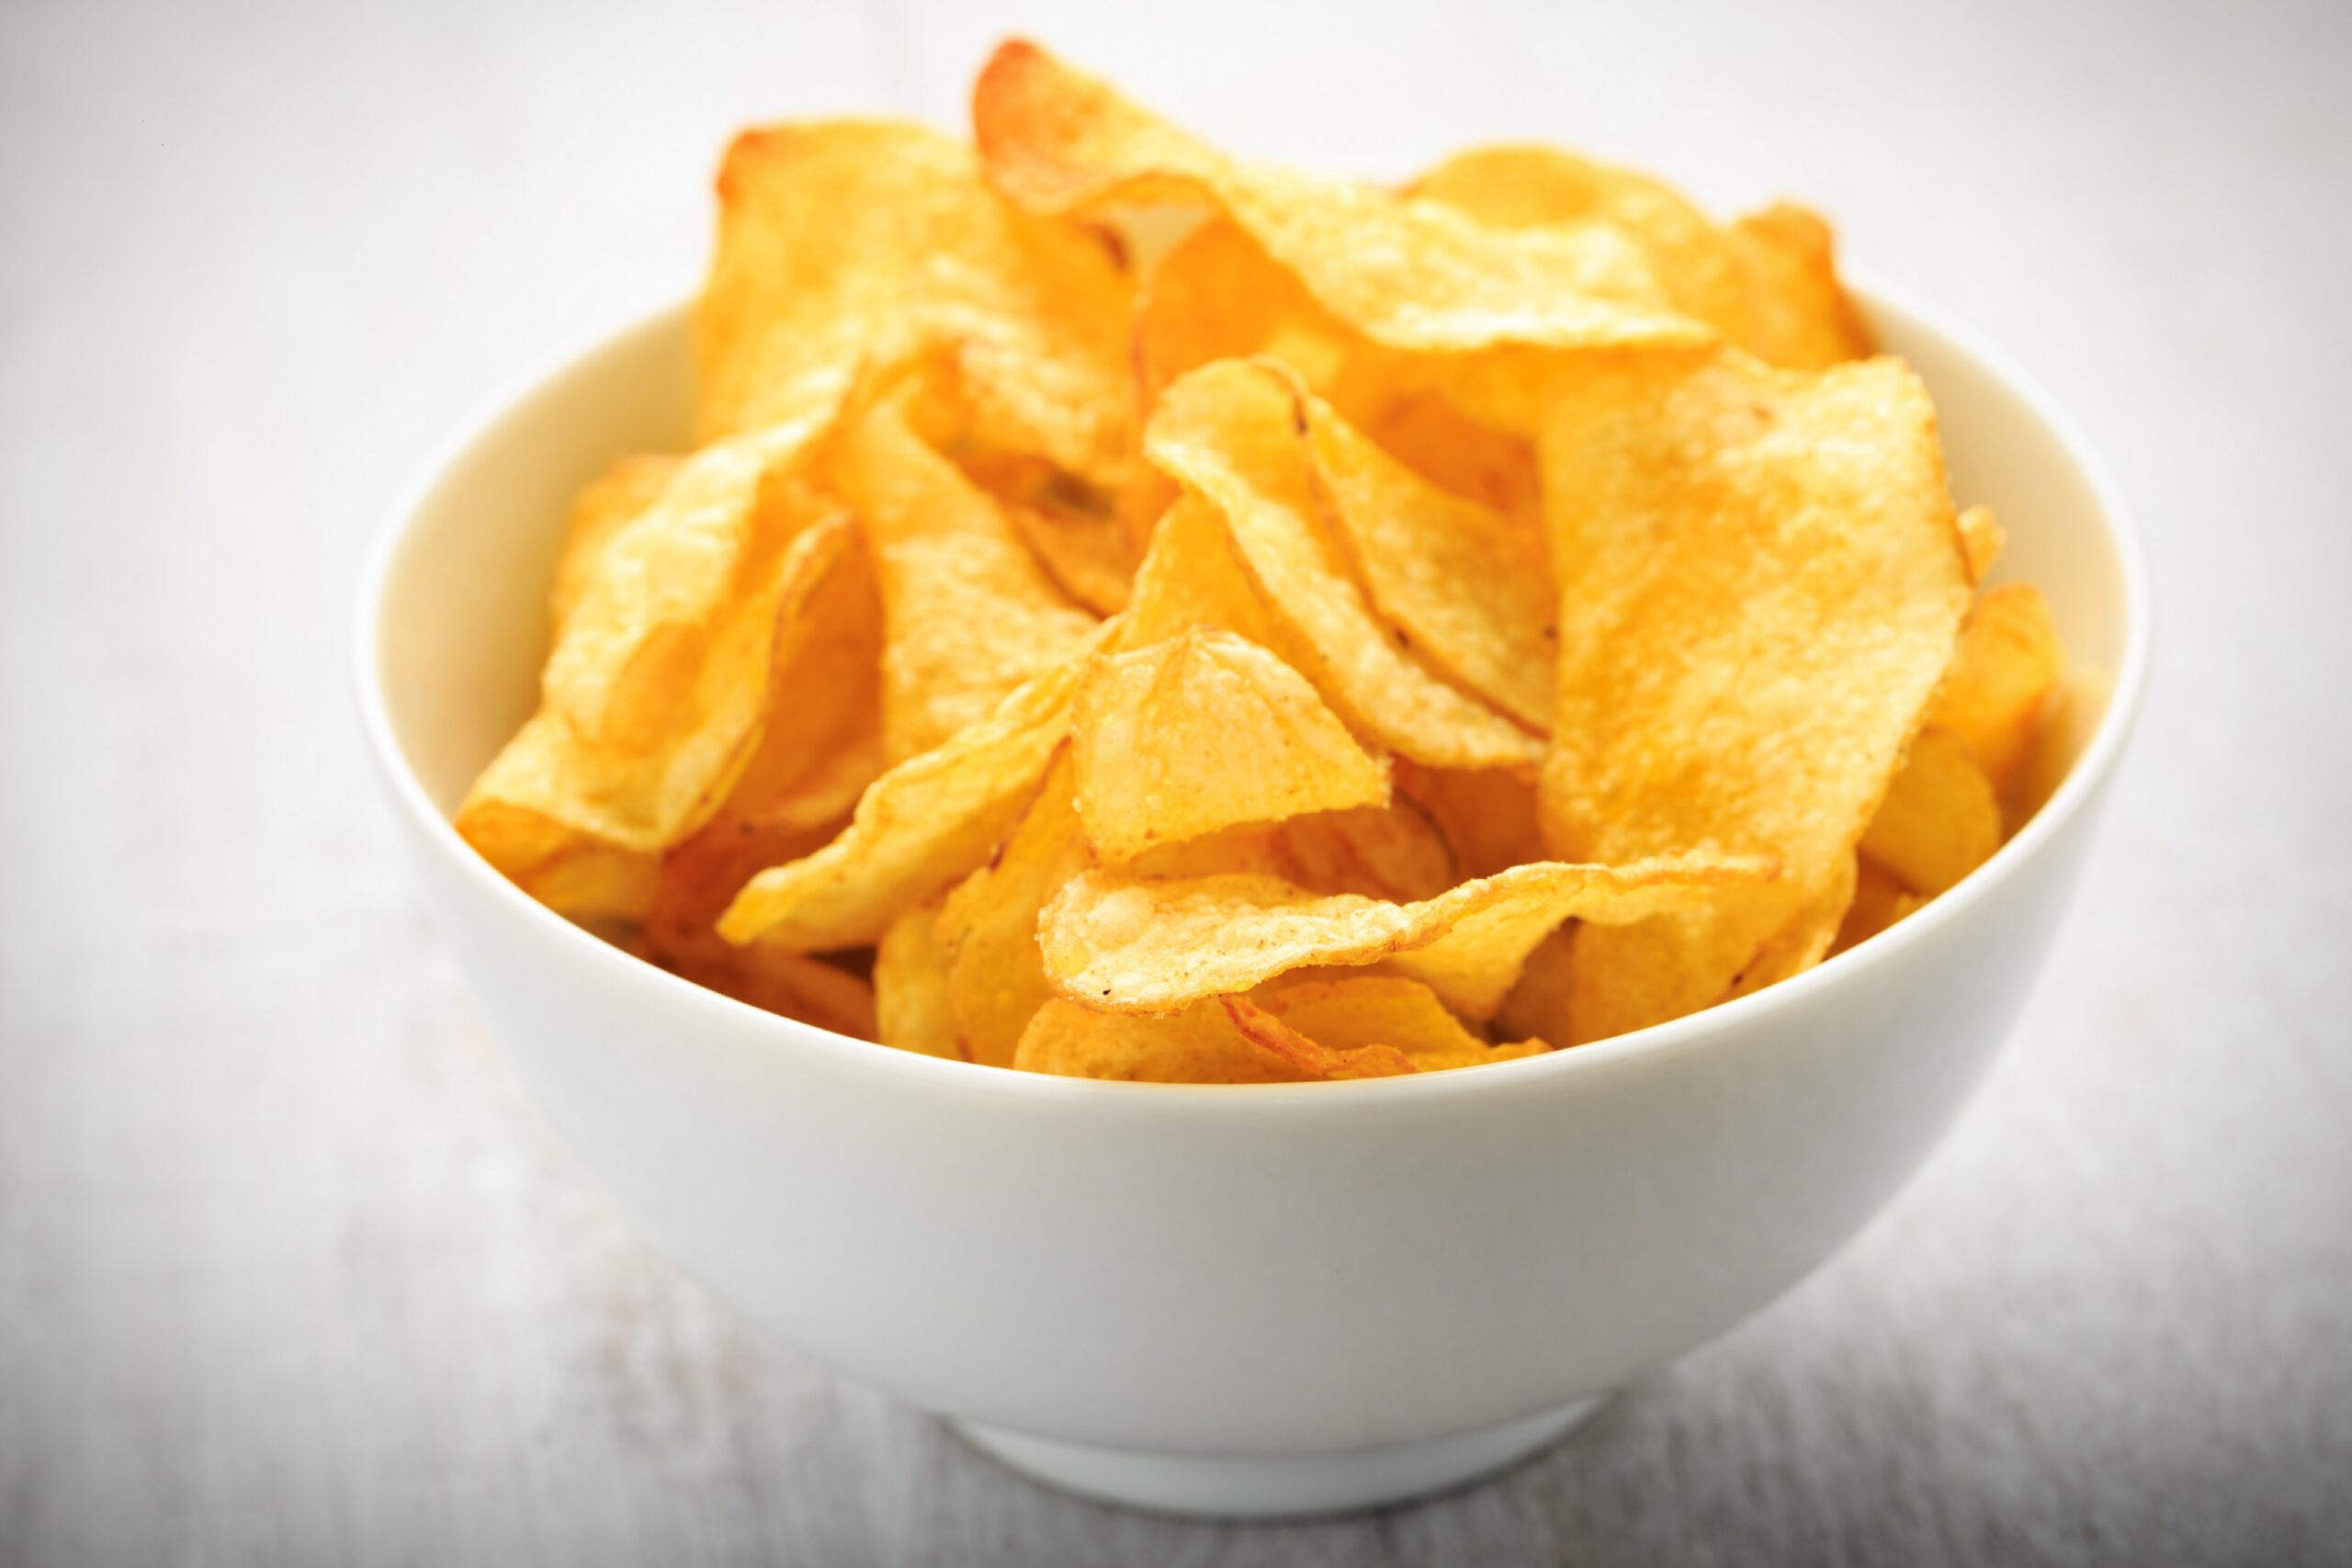 Recall for popular potato chips: health consequences cannot be ruled out